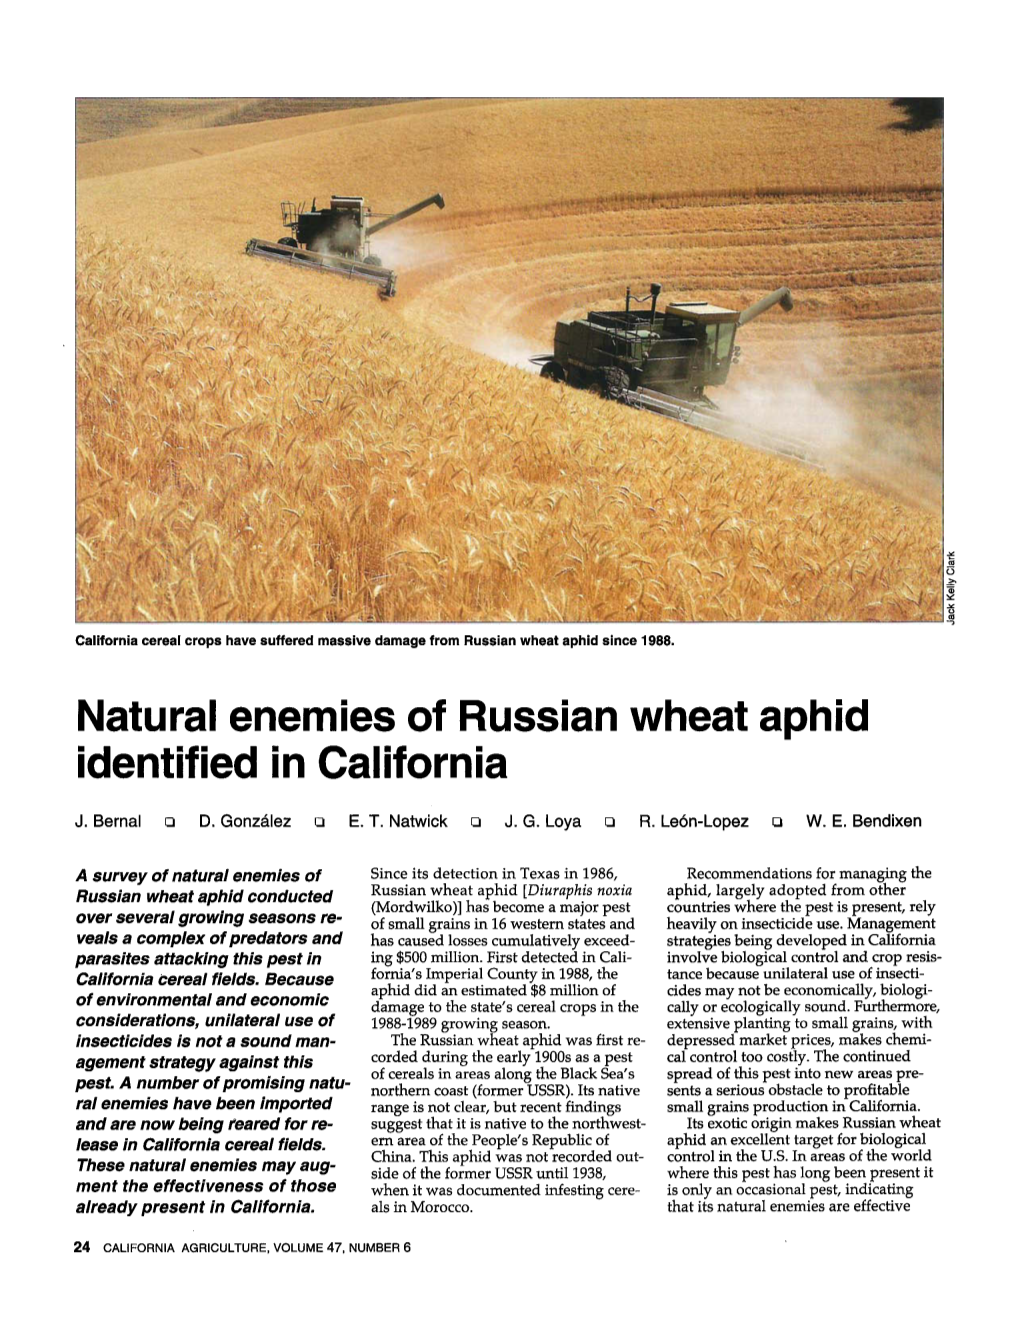 Natural Enemies of Russian Wheat Aphid Identified in California